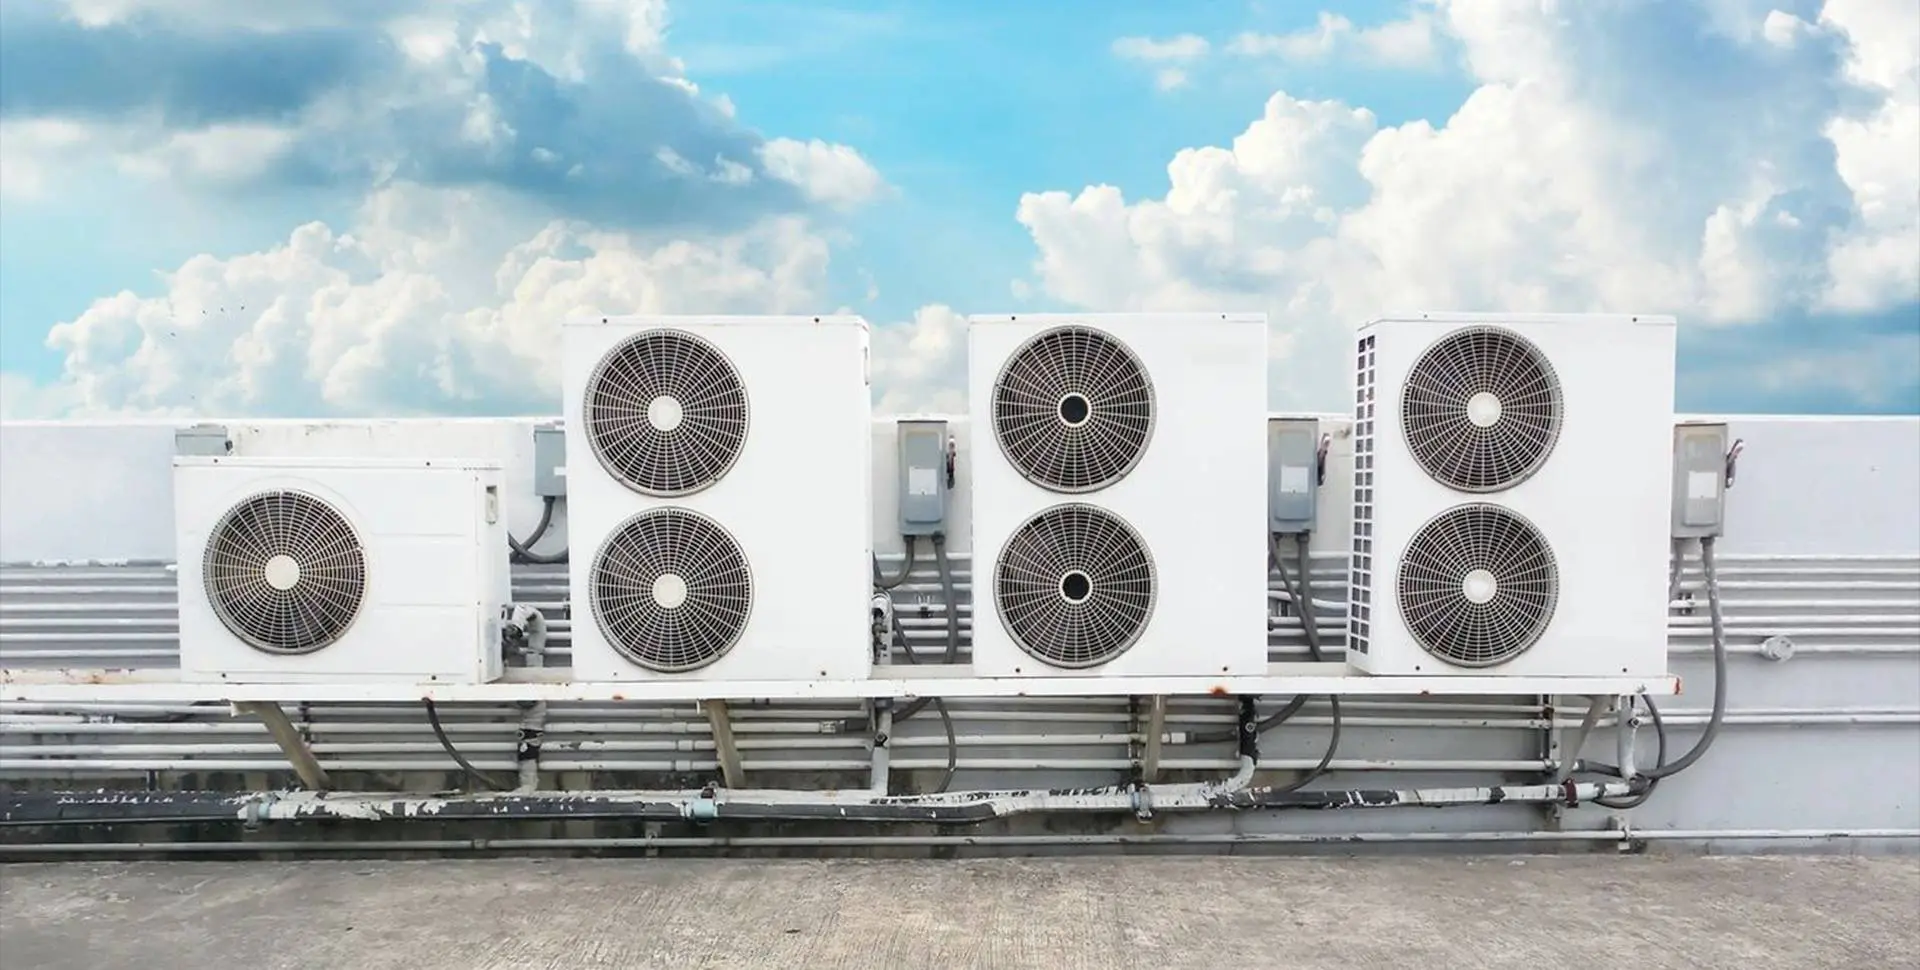 Compressor of Air Condition on Roof With Cloudy Sky Background